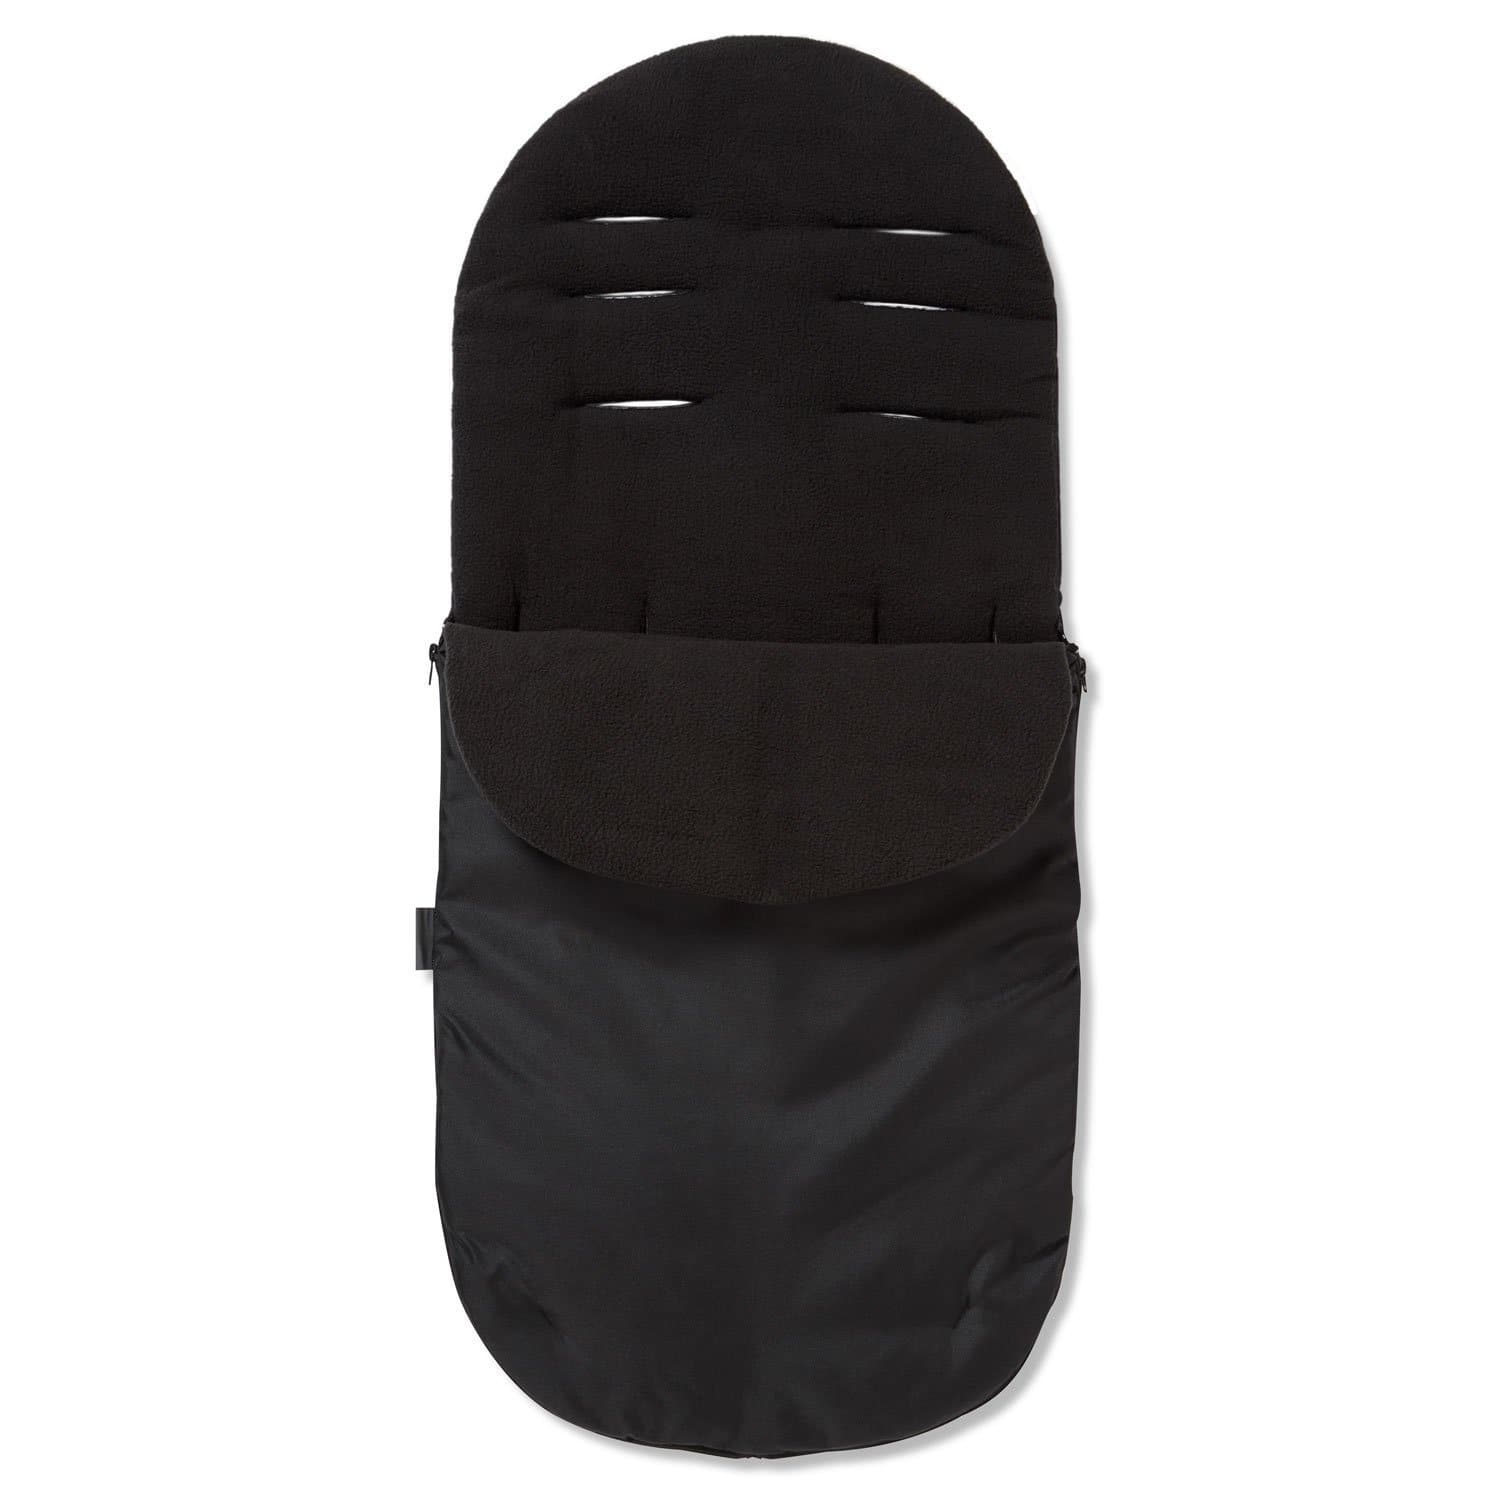 Footmuff / Cosy Toes Compatible with Petite - Black / Fits All Models | For Your Little One